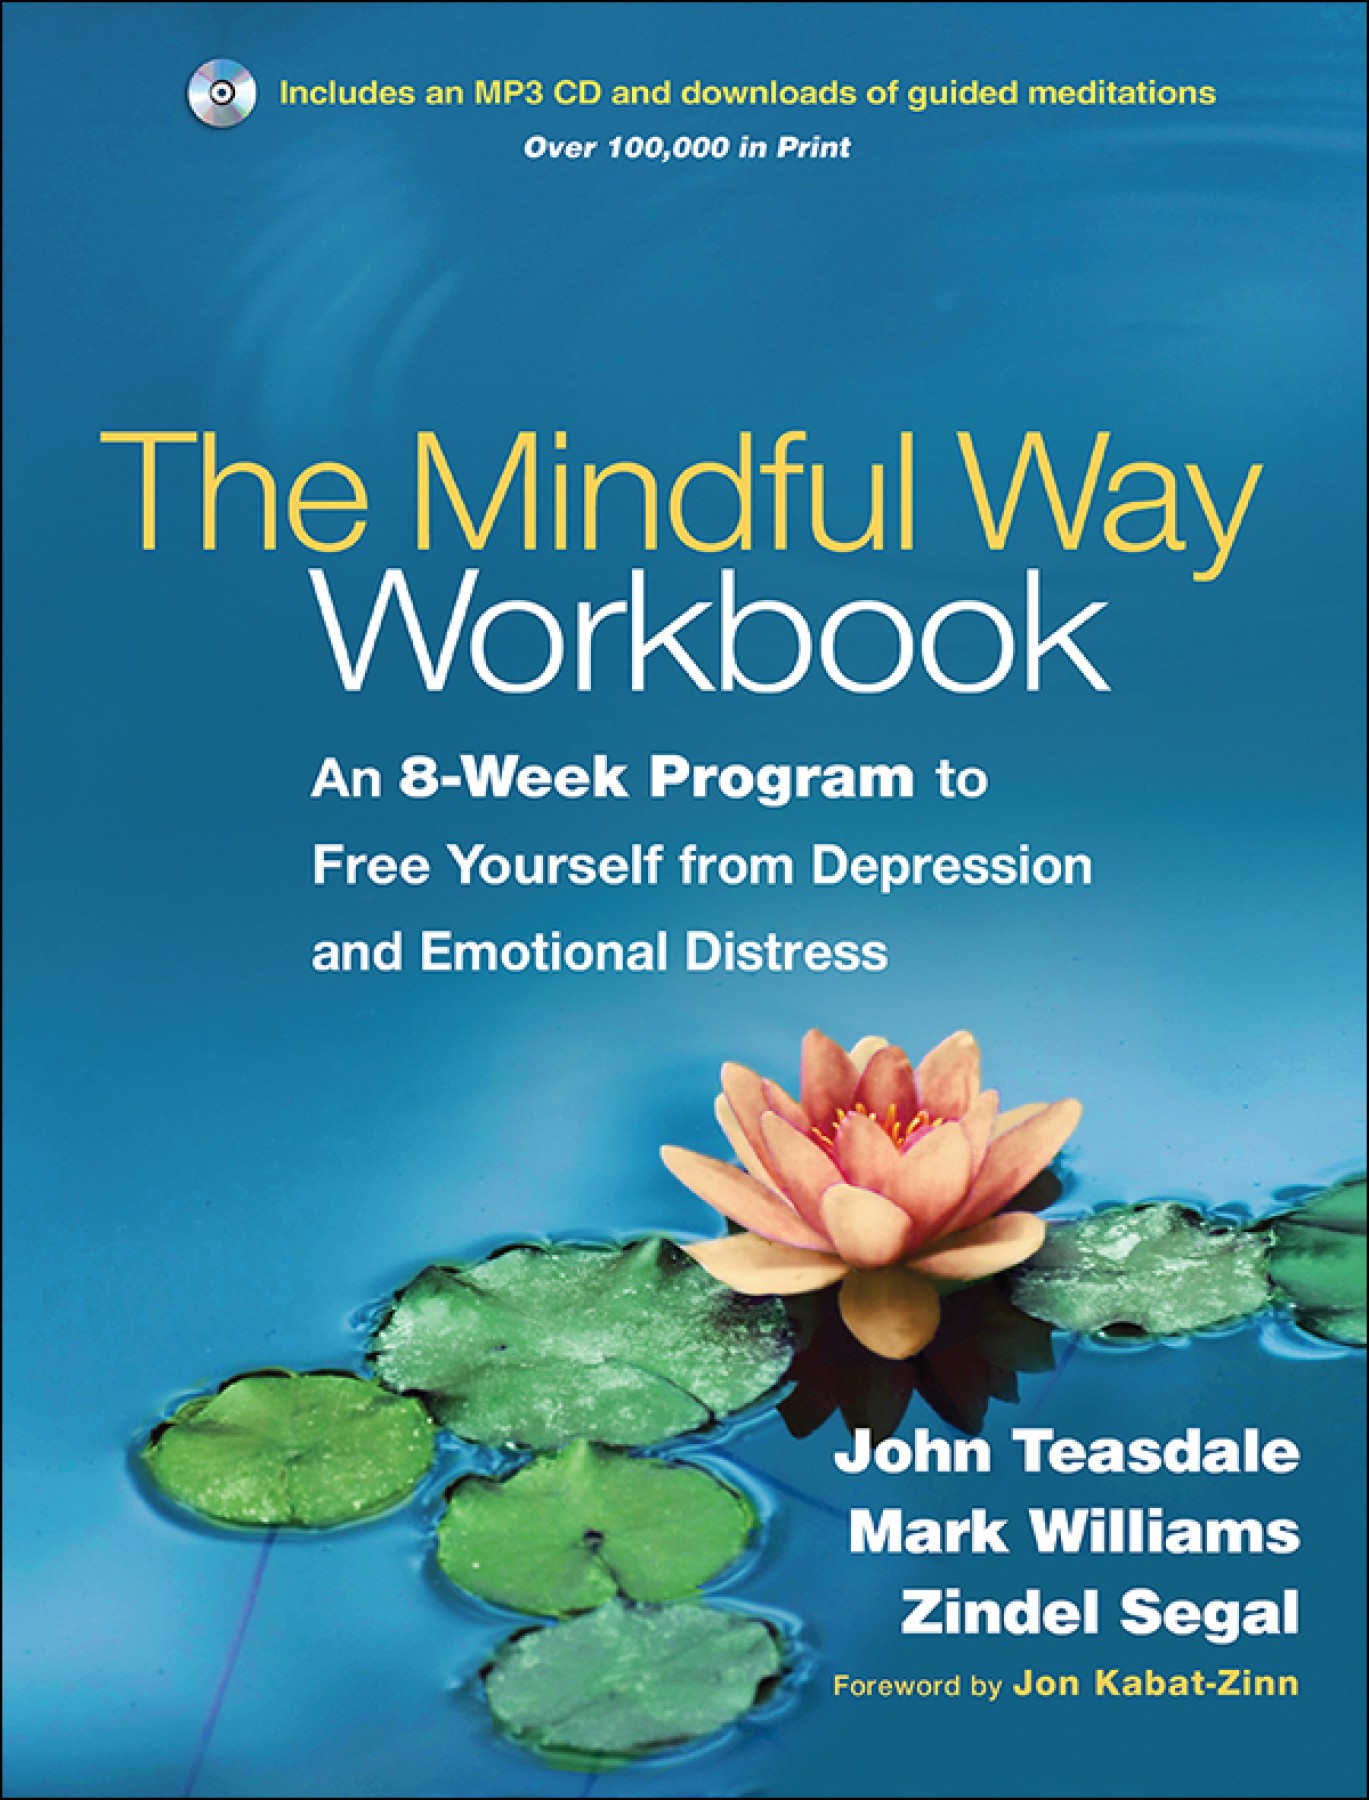 The mindful way workbook: An 8-week program to free yourself from depression and emotional distress